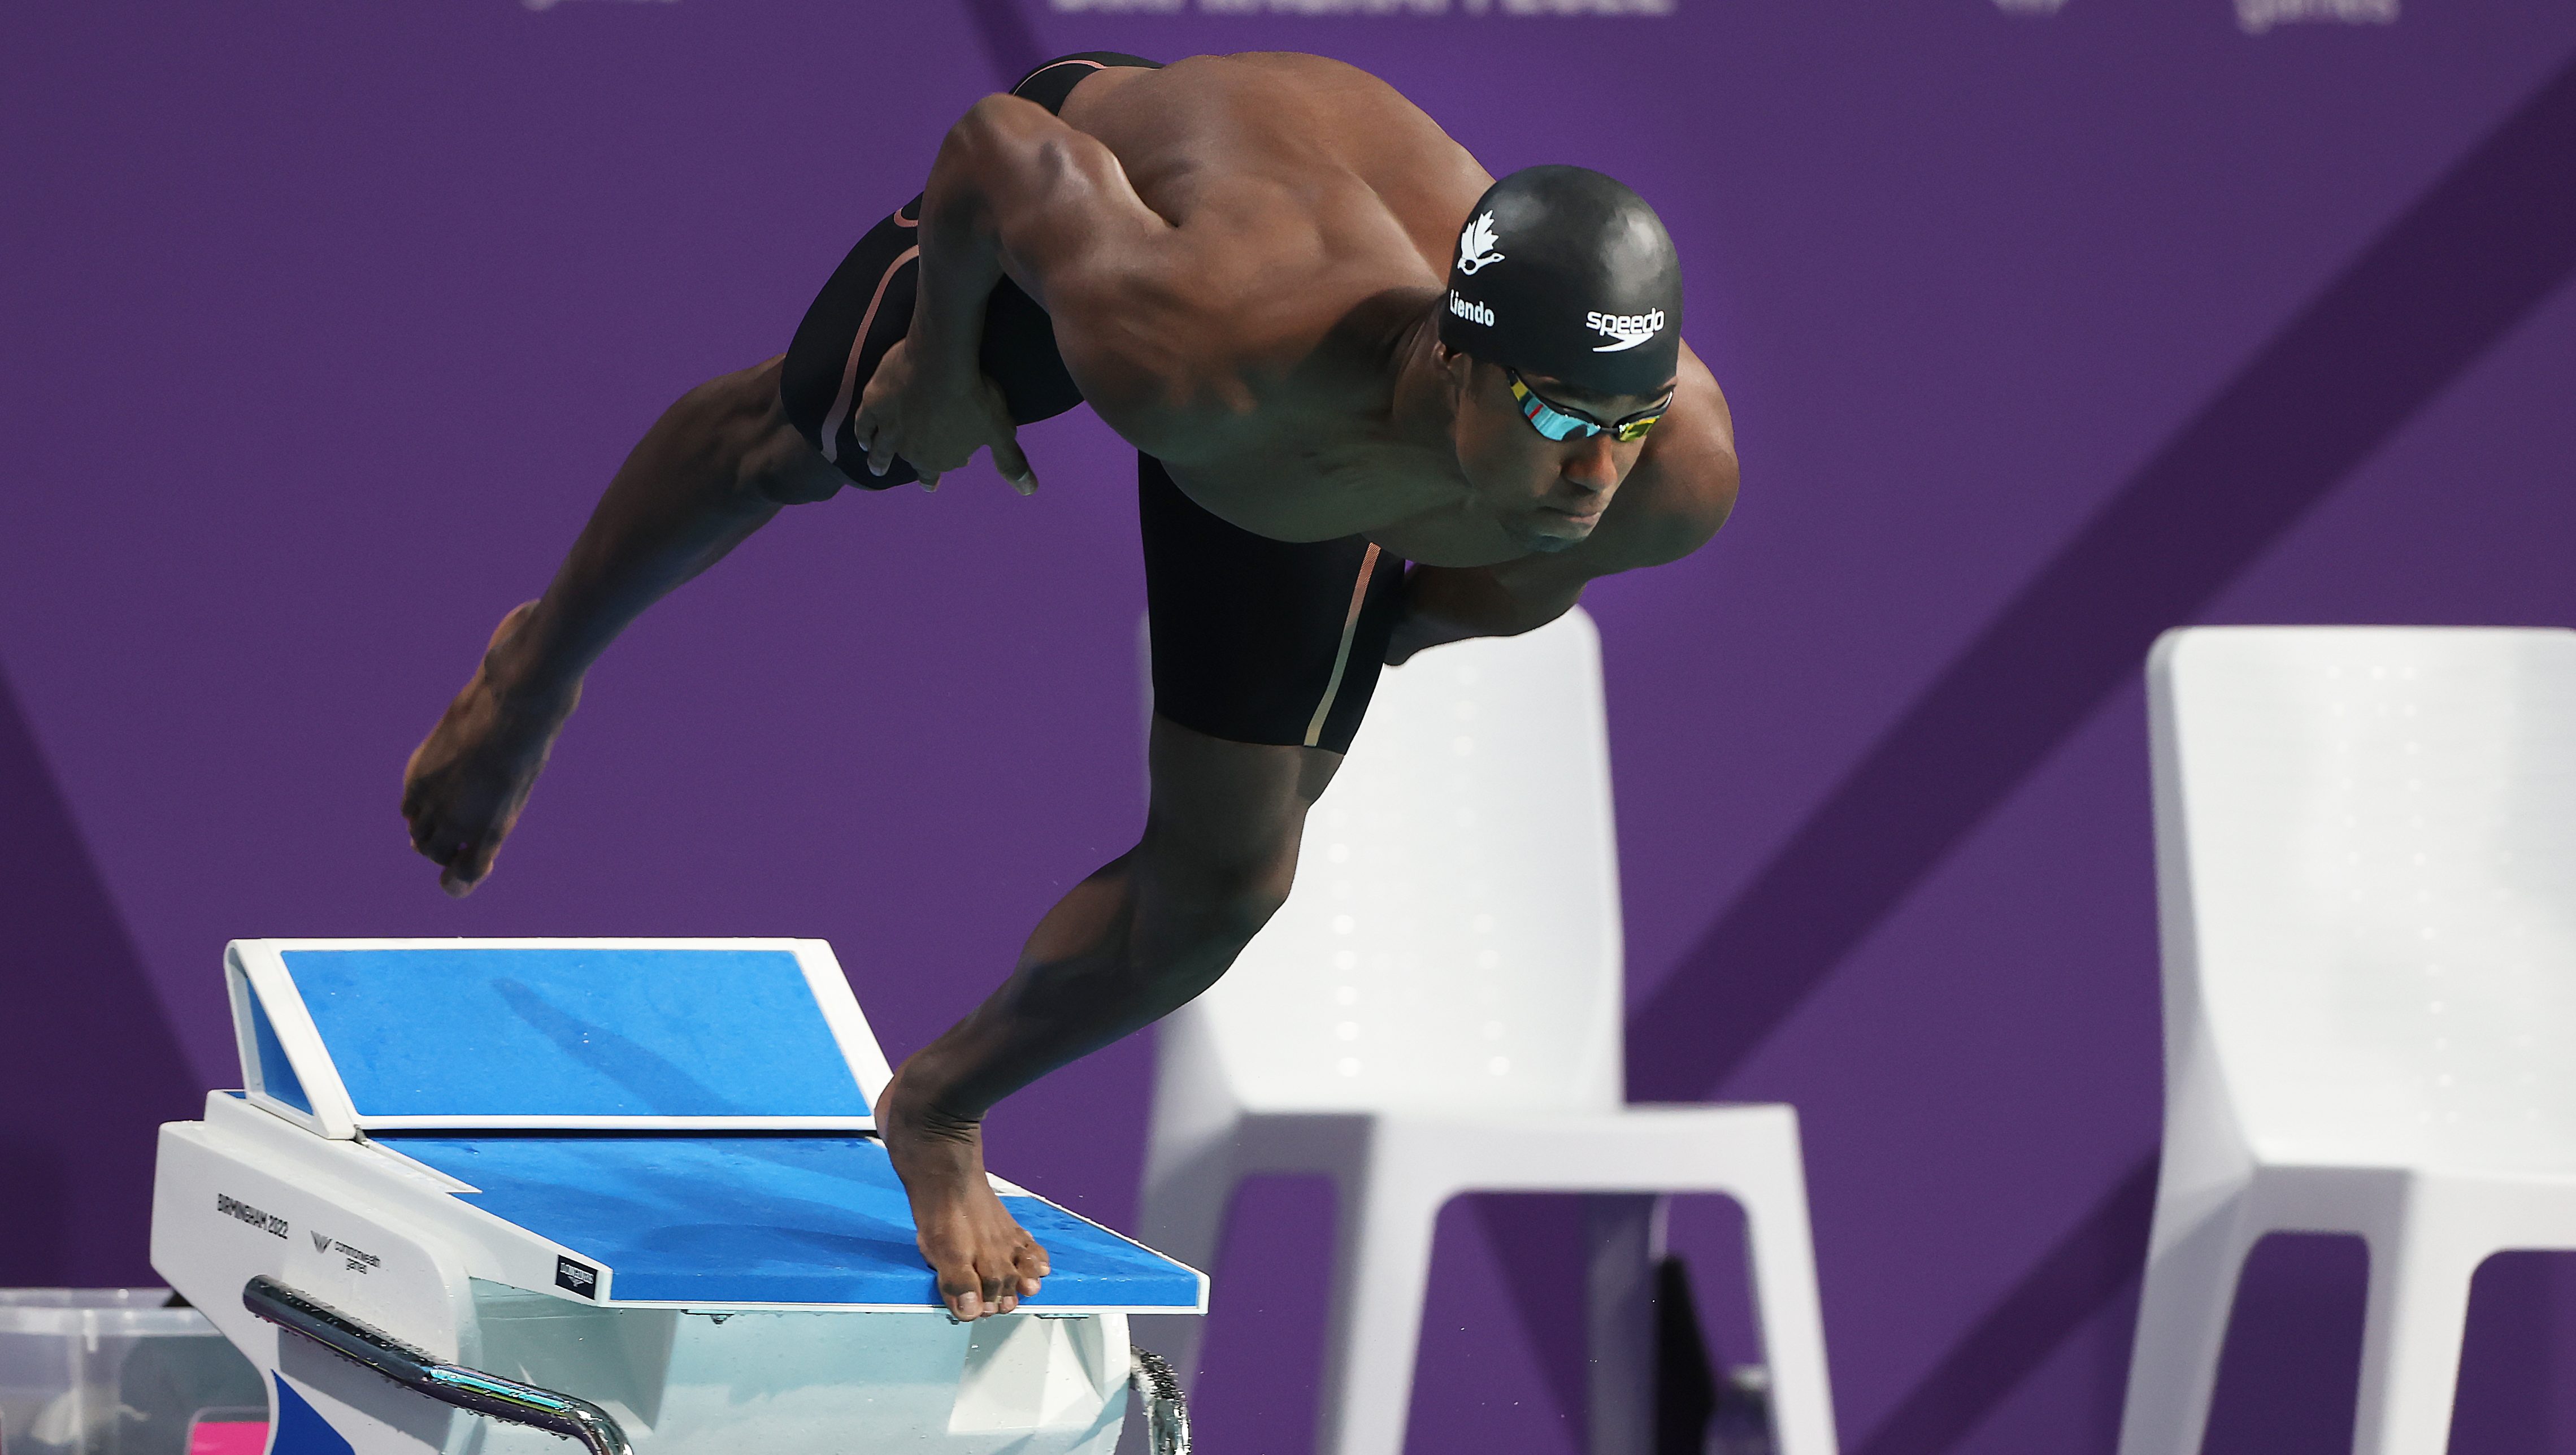 2022 Commonwealth Games Joshua Liendo swims to gold on Day 5 - Team Canada 